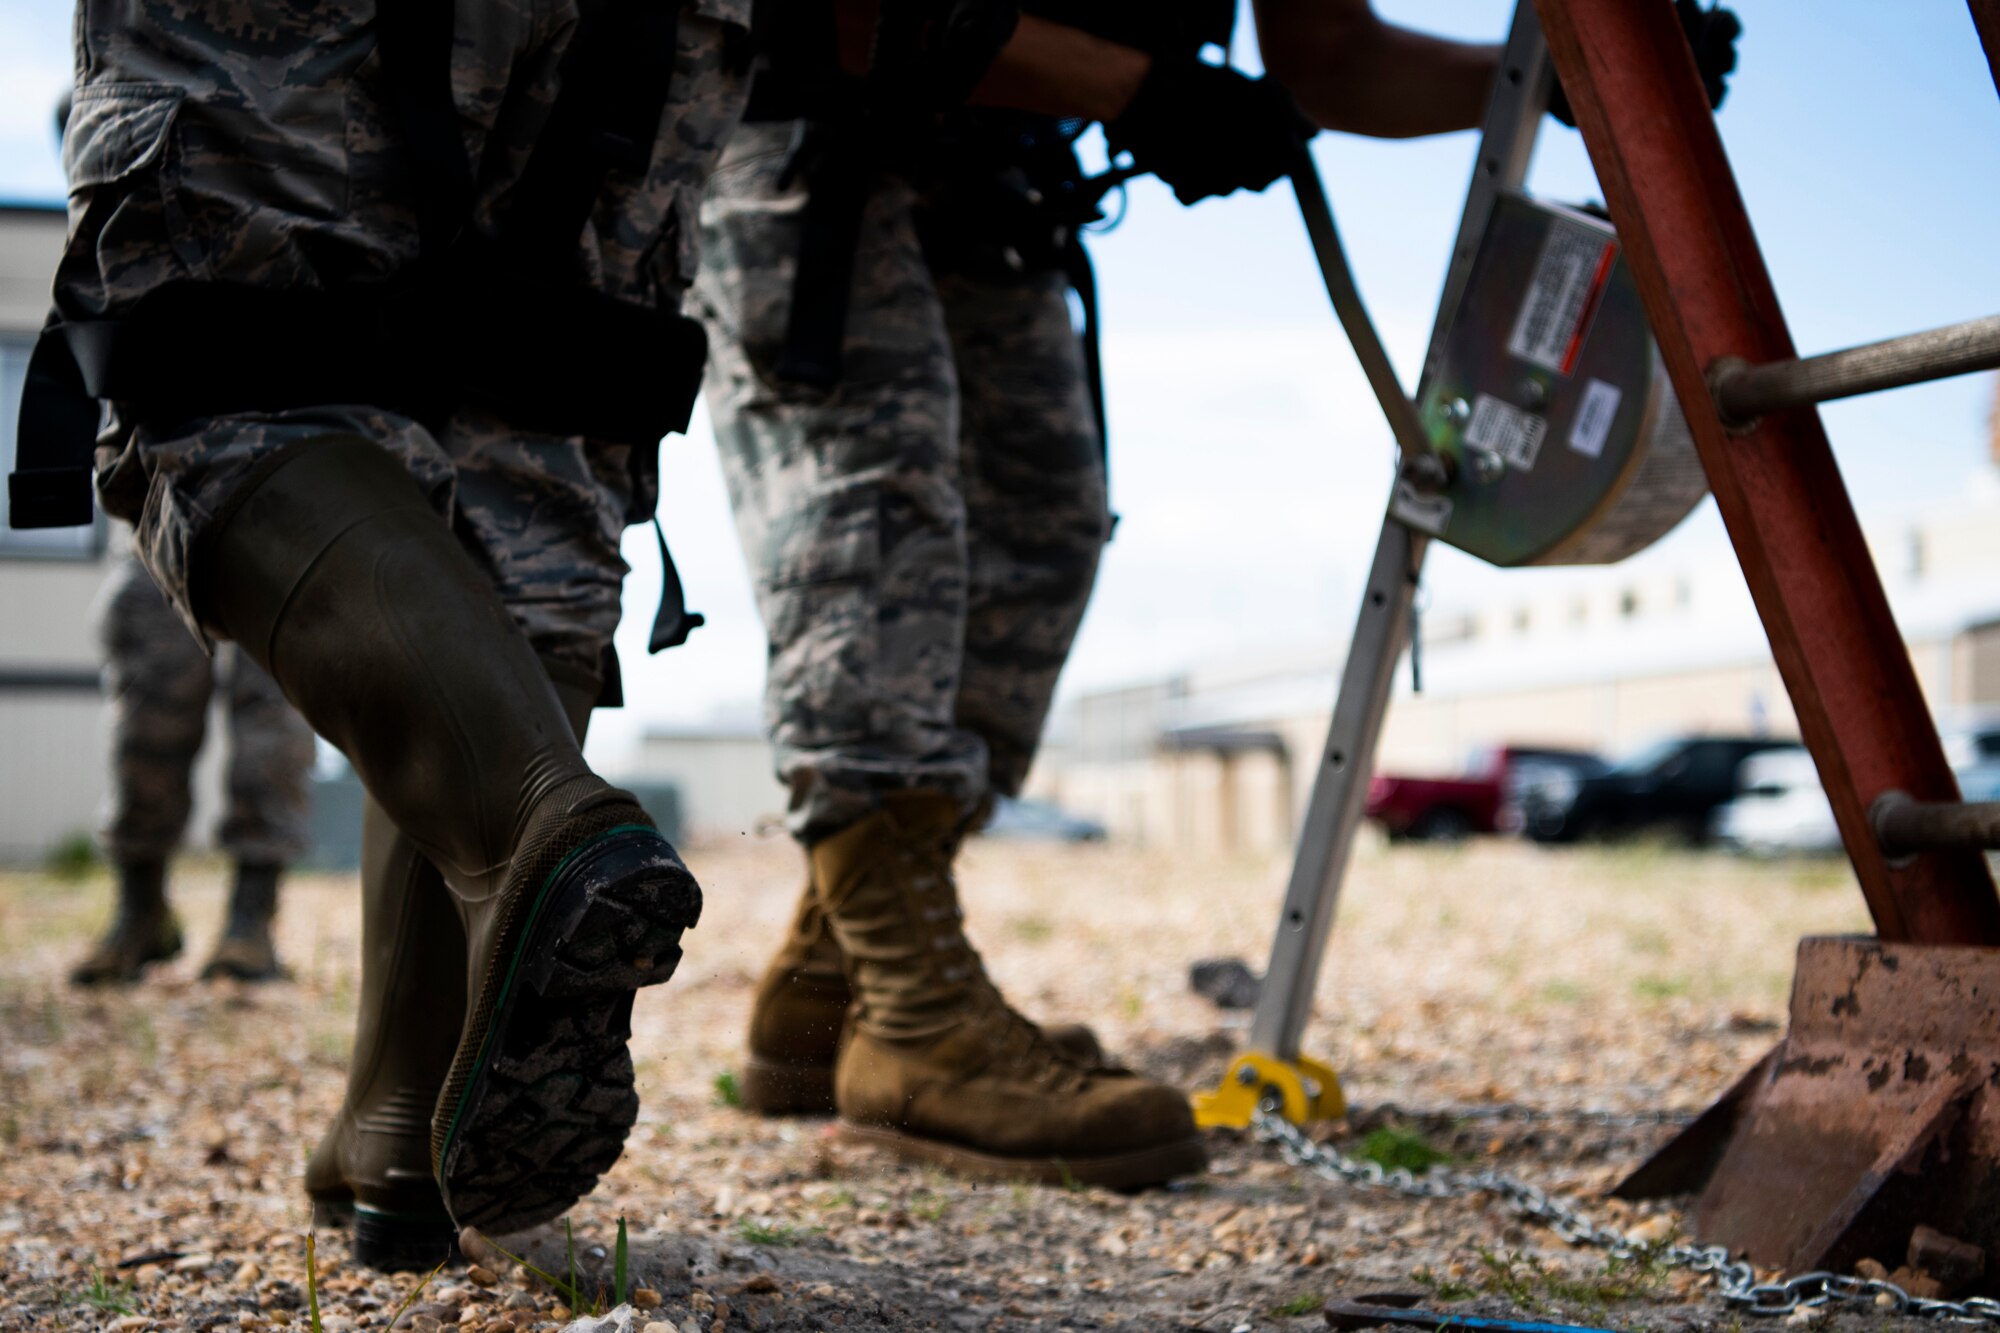 Cable antenna systems technicians with the 85th Engineering Installation Squadron assigned to Keesler Air Force Base, Mississippi, prepare to enter a manhole at Tyndall Air Force Base, Florida, Aug. 28, 2020. The 85th EIS is assisting the 325th Communications Squadron to move information transfer nodes from damaged buildings, which will improve network stability. (U.S. Air Force photo by Tech. Sgt. Clayton Lenhardt)